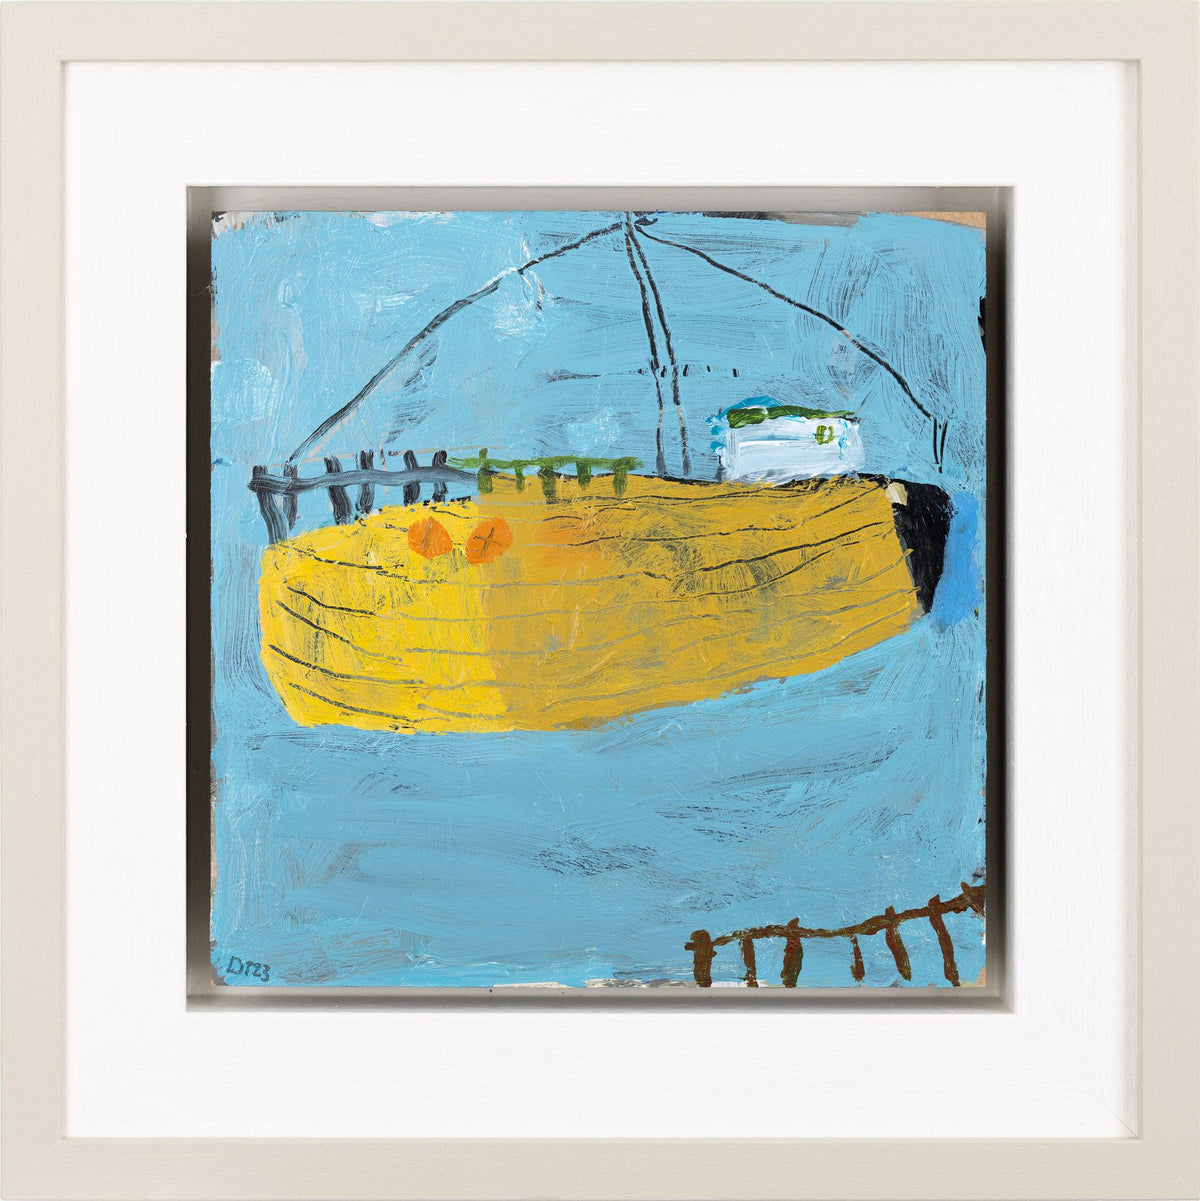 &#39;Yellow Voyager&#39; mixed media original on panel by David Pearce fine art, available at Padstow Gallery, Cornwall